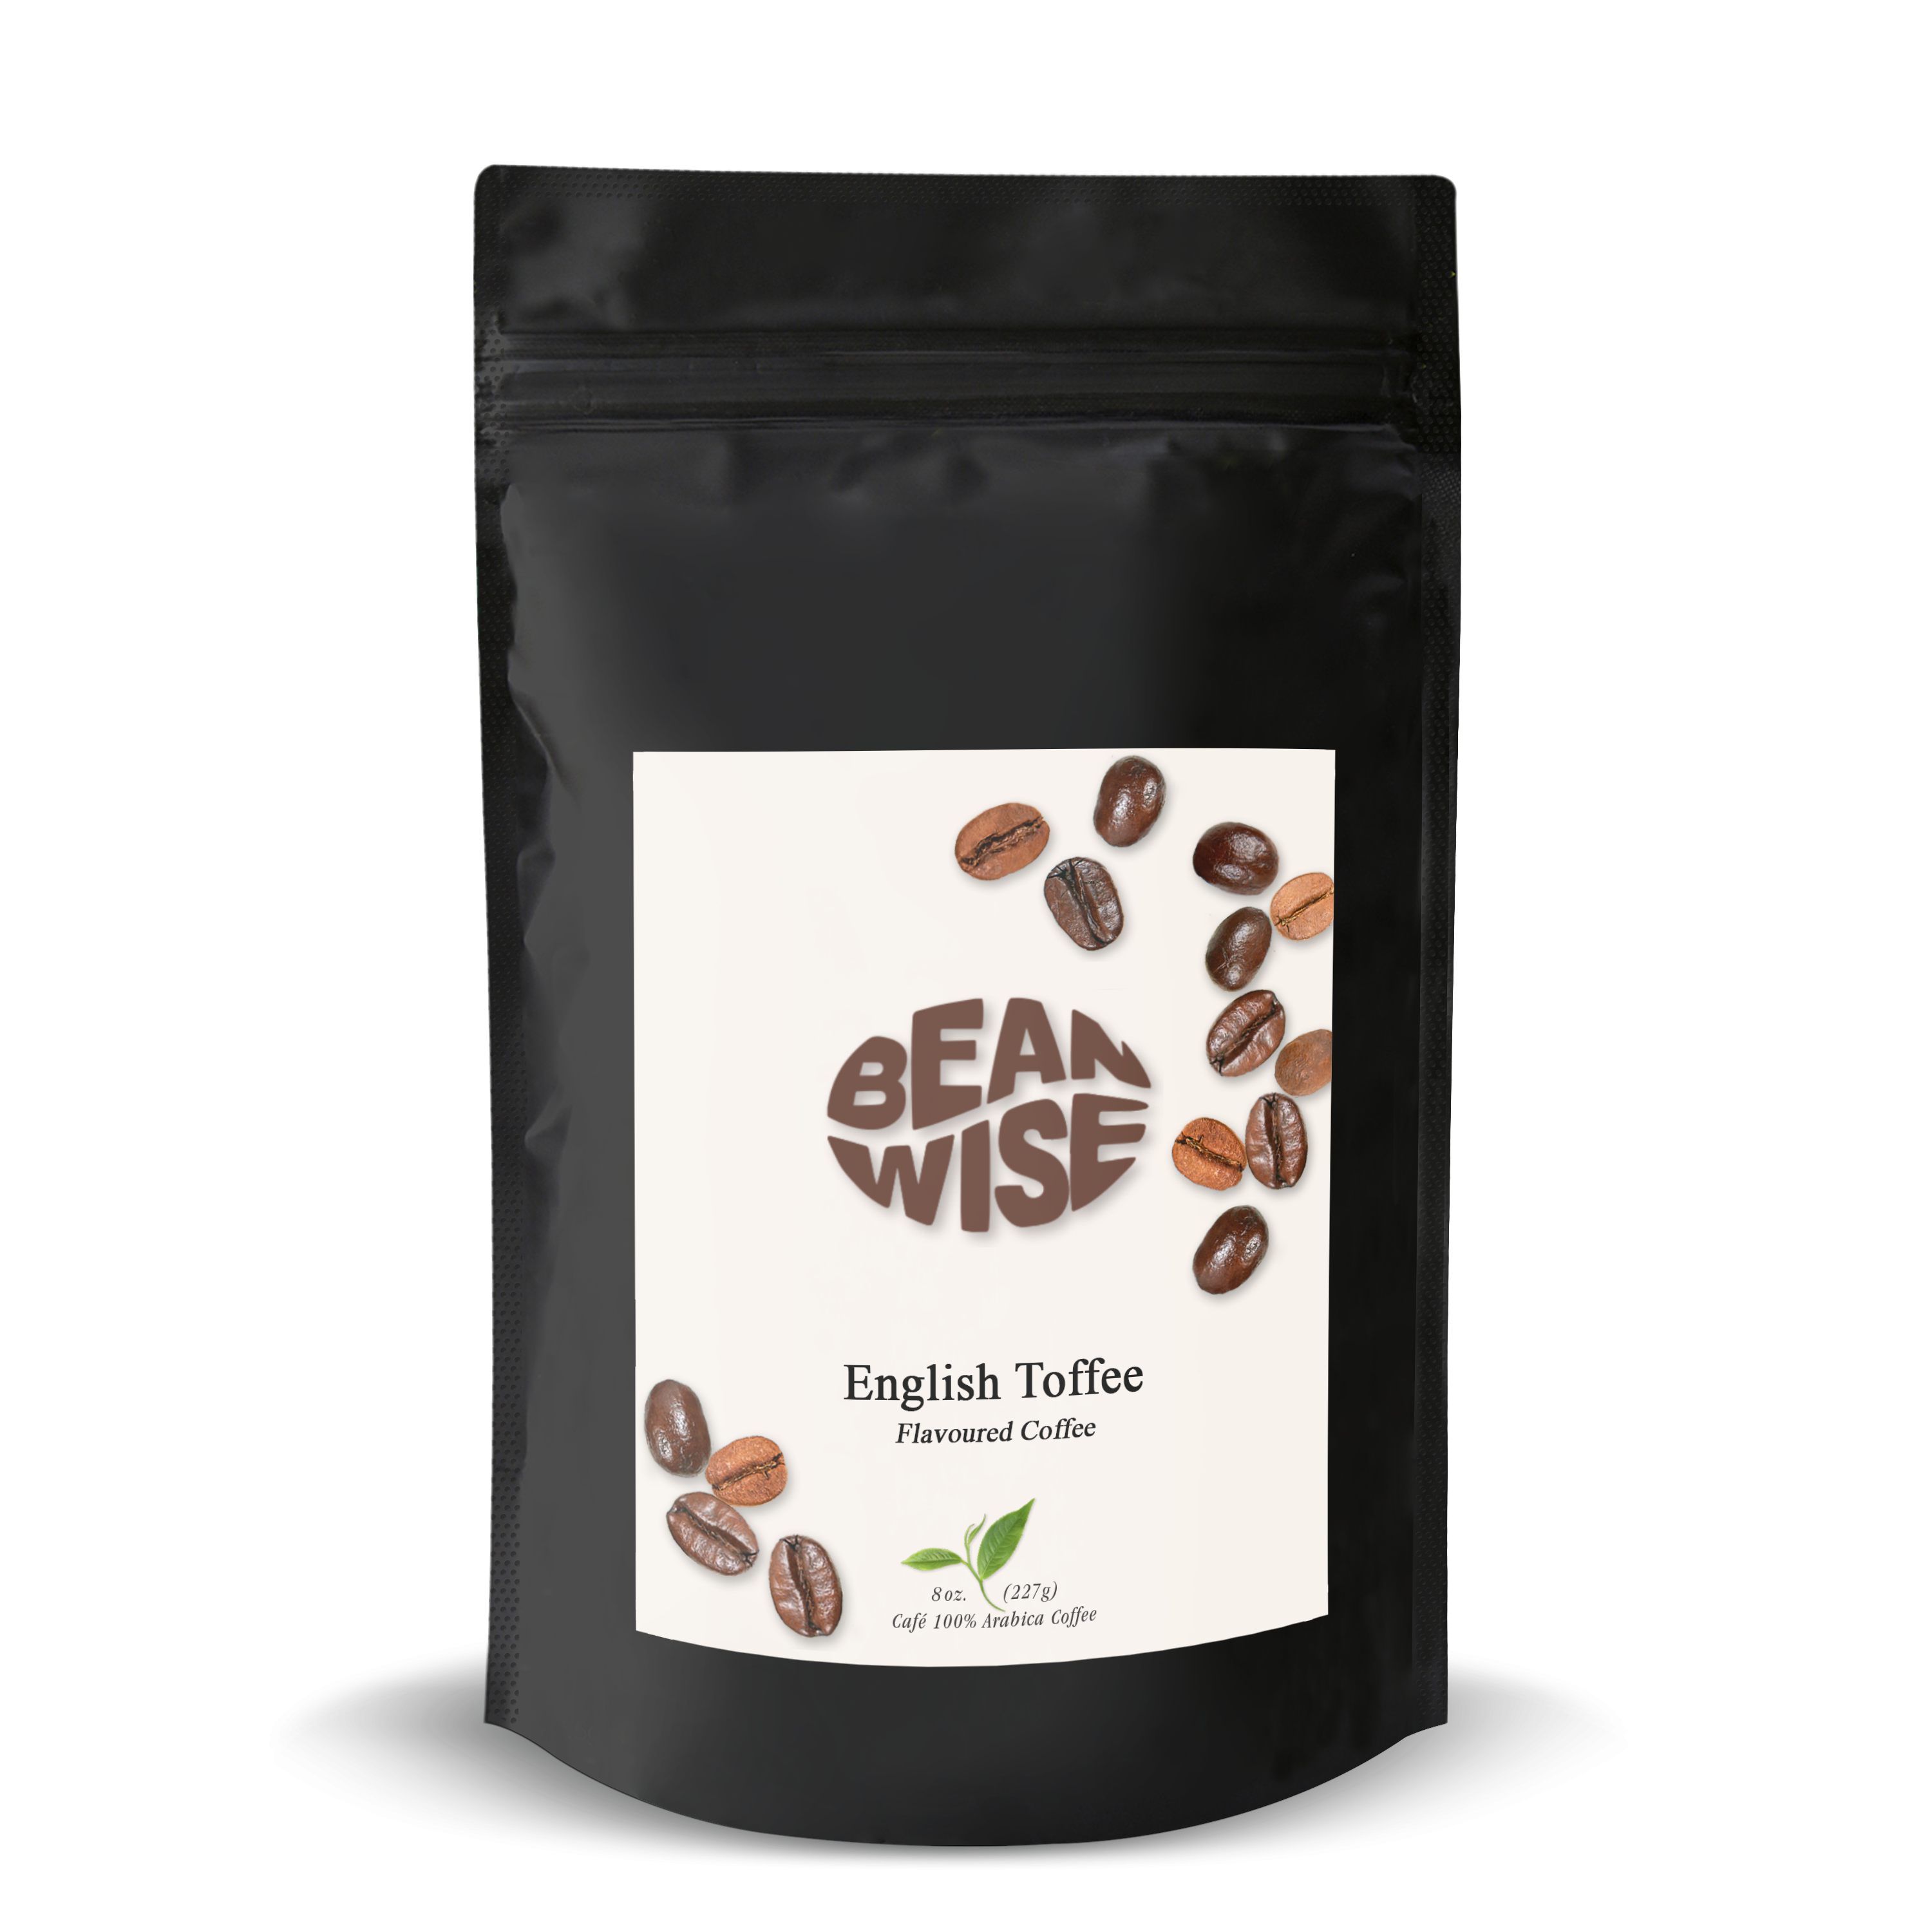 English Toffee Flavoured Coffee Beans